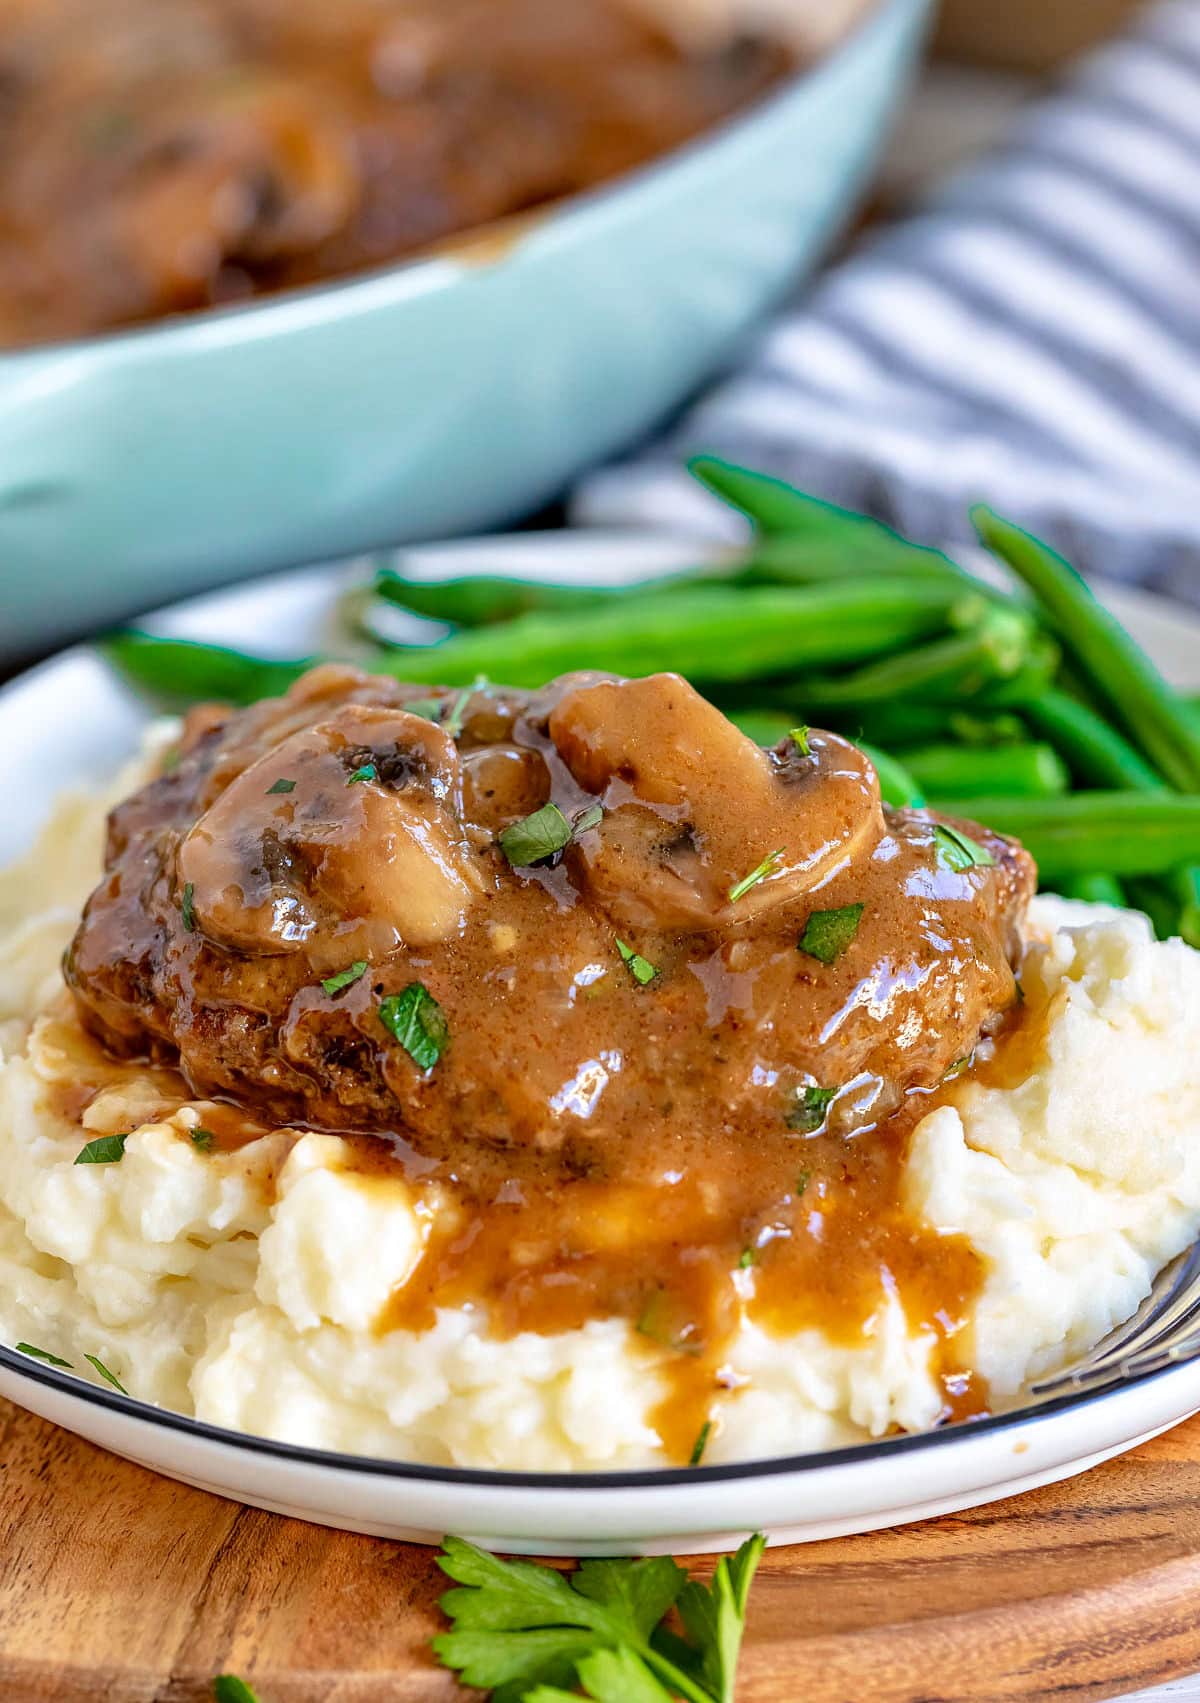 salisbury steak on bed of mashed potatoes with green beans as well. Mushroom gravy is drizzled on top of the steak and mashed potatoes.